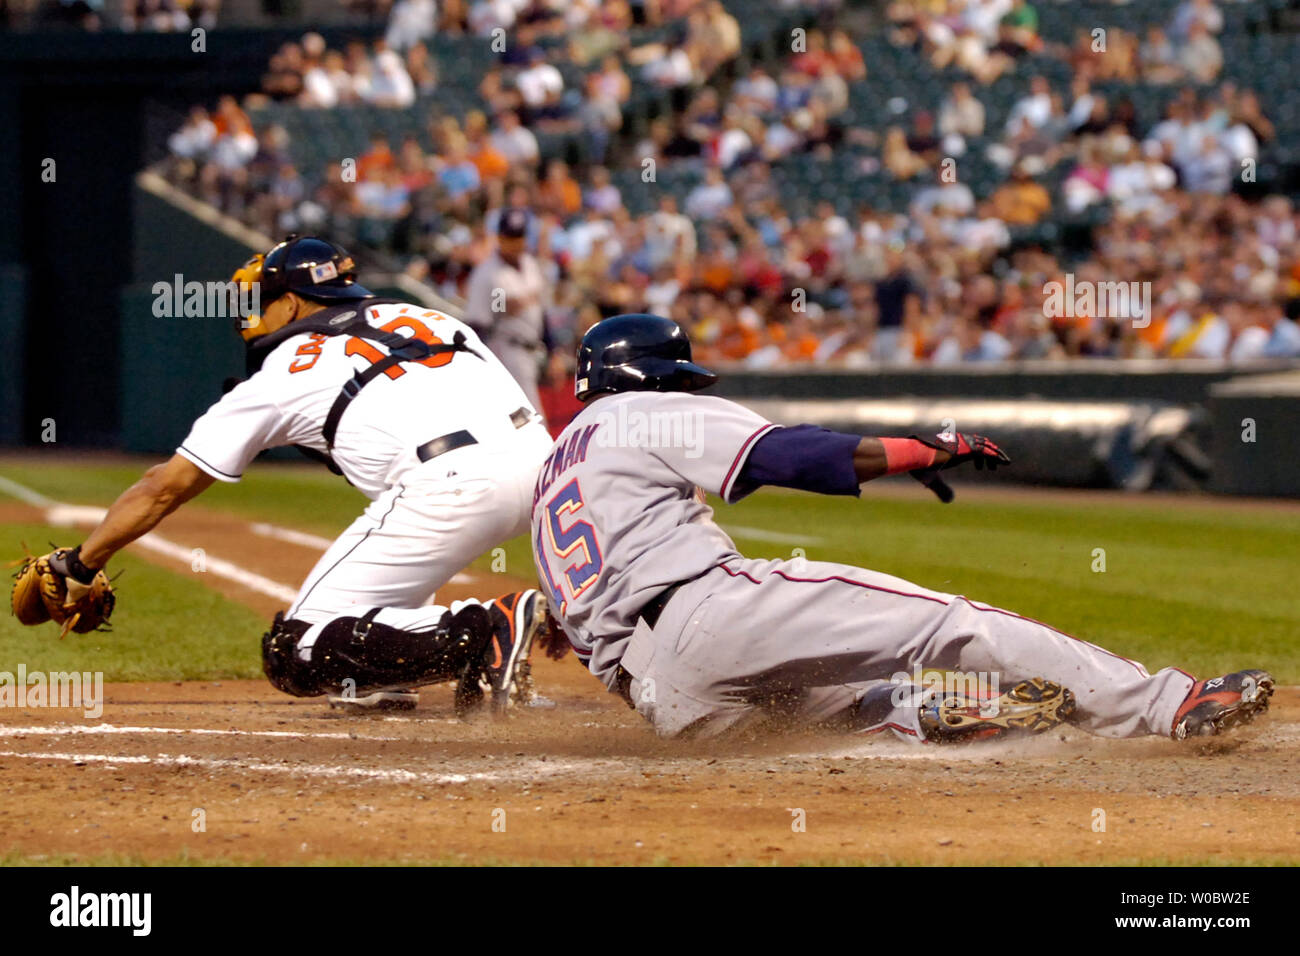 Washington Nationals shortstop Cristian Guzman (R) safely slides home after second baseman Felipe Lopez hit a two-run RBI double in the fourth inning against Baltimore Orioles pitcher Daniel Cabrera on June 12, 2007 at Orioles Park at Camden Yards in Baltimore.  (UPI Photo/Mark Goldman) Stock Photo